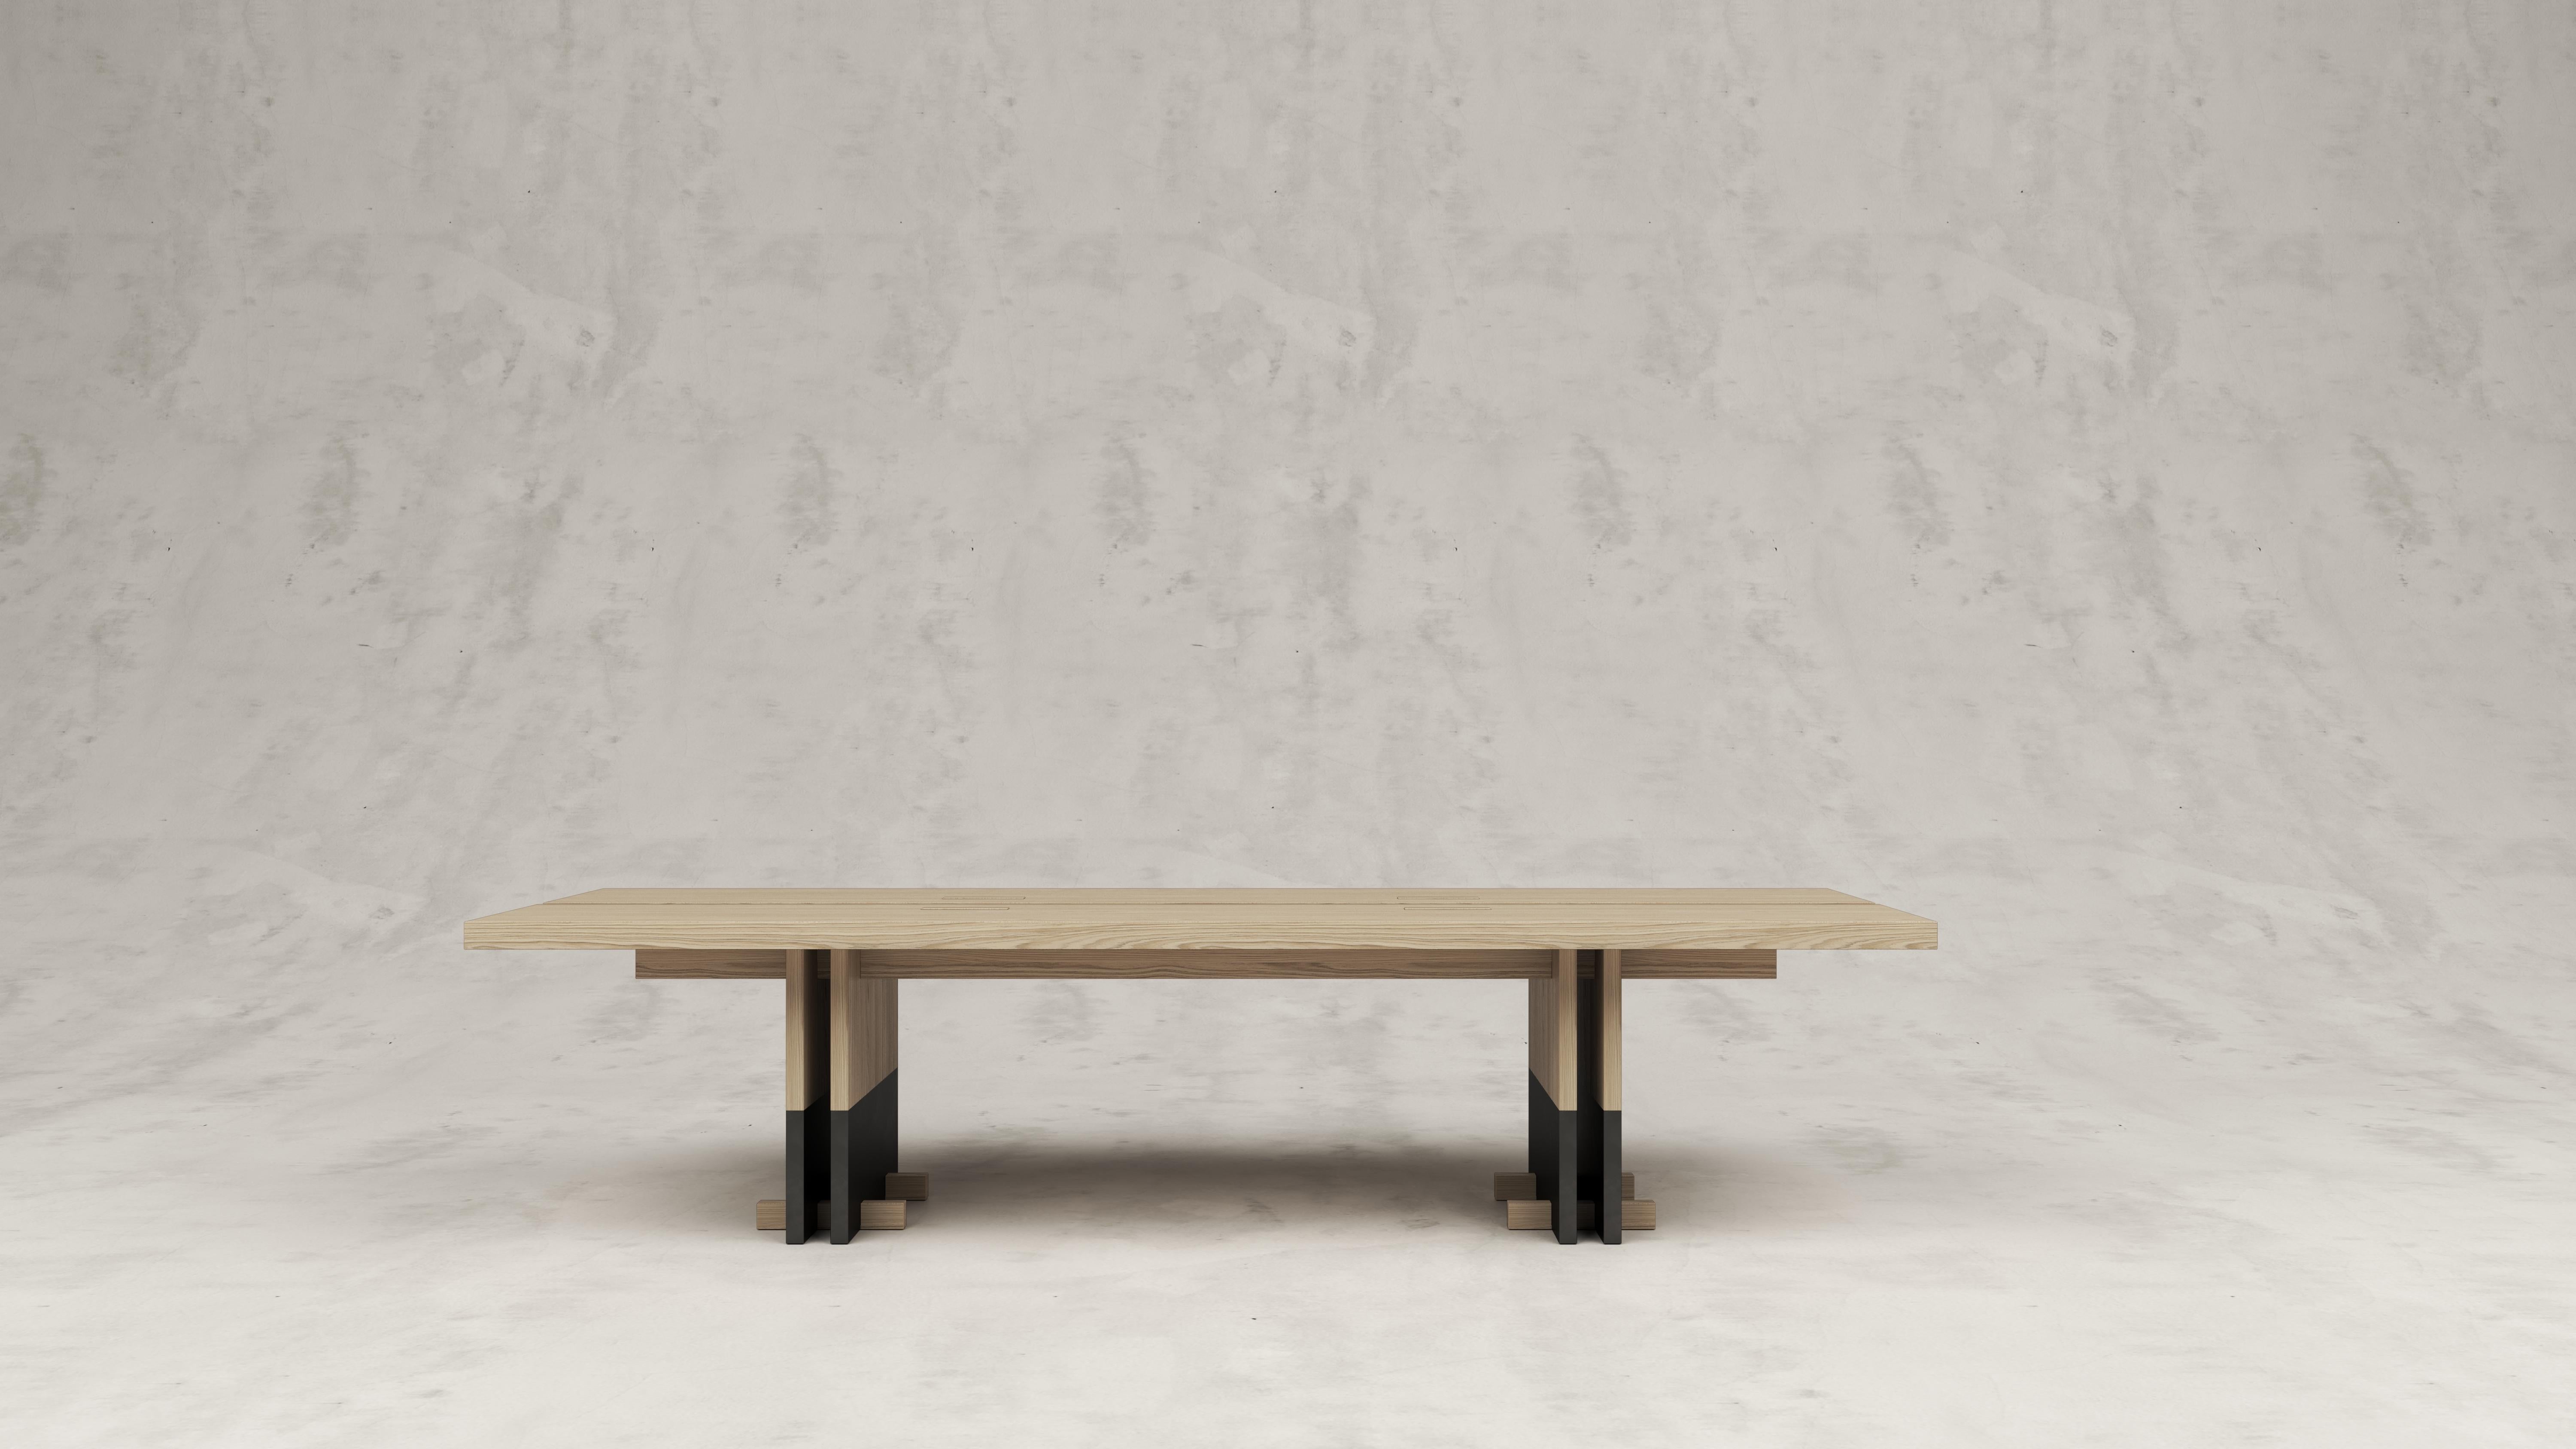 Rift wood dining table by Andy Kerstens
Dimensions: W 240 x D 98 x H 74 cm
Materials: Bleached Oak, Powder coated inox
Optional little feet at table legs.
Handmade in Belgium

Available in Solid Larch, Oak and Walnut and in 320 x 102 x 74 cm, and